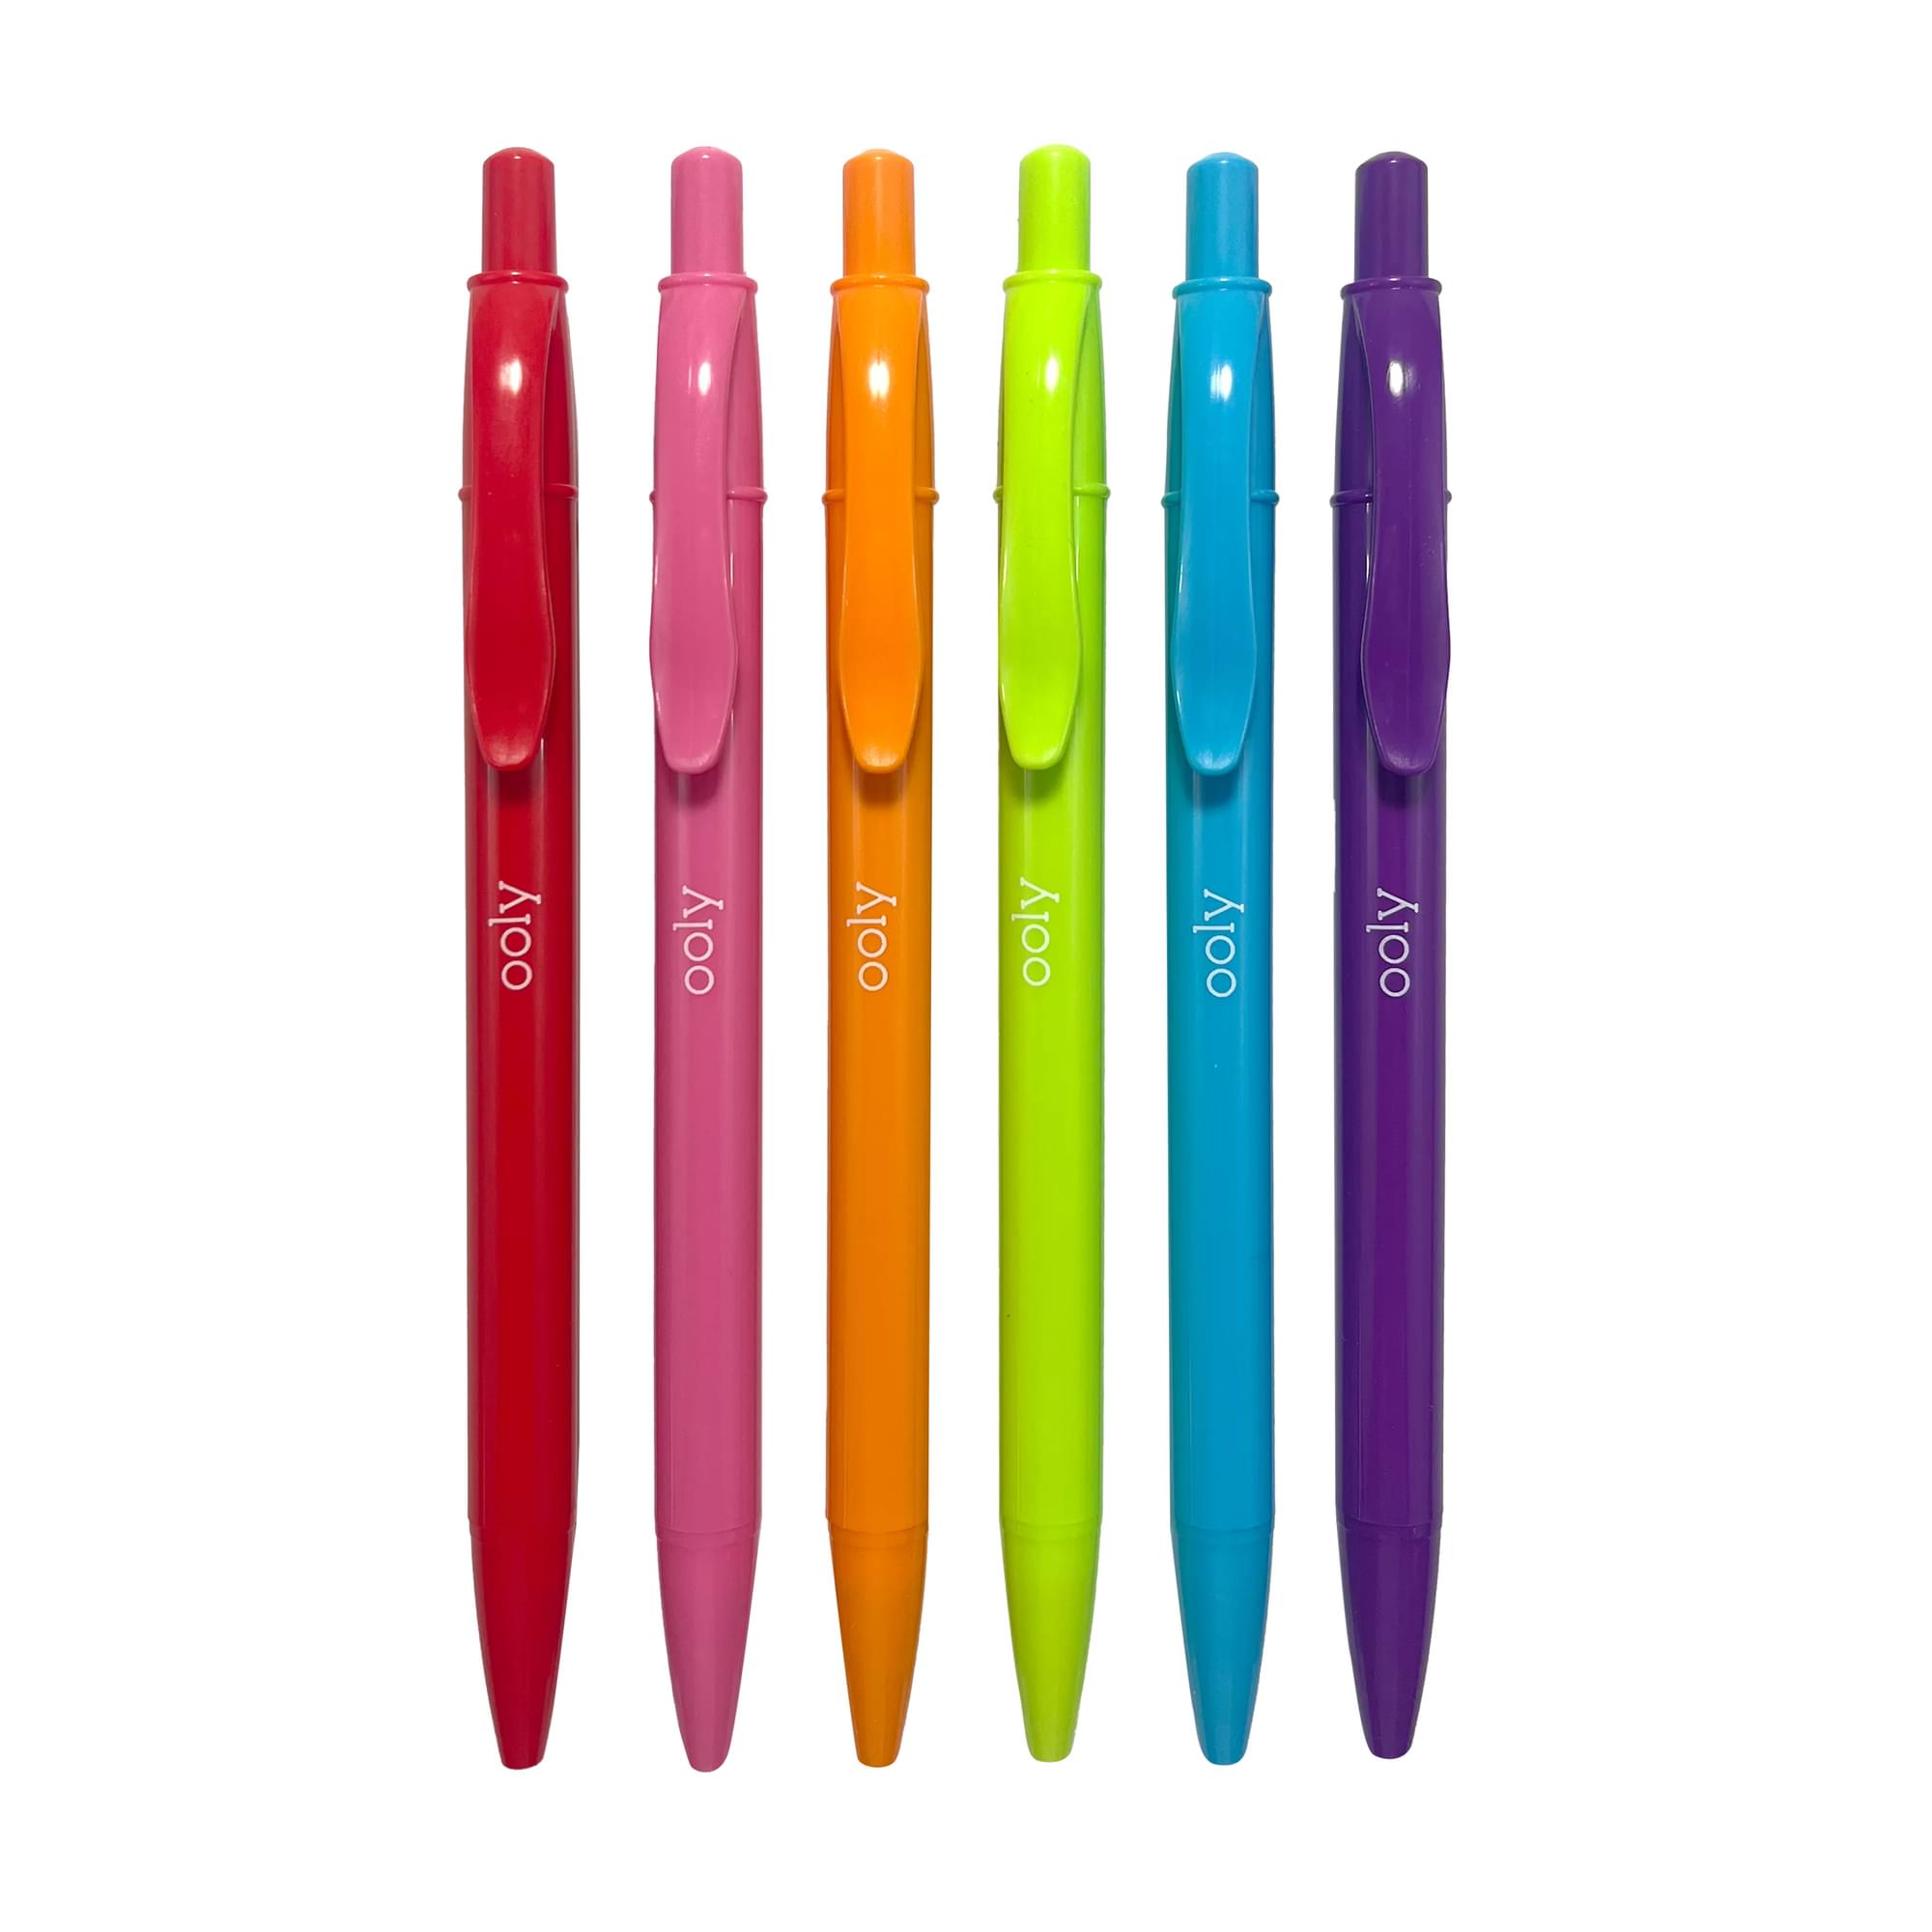 OOLY Bright Writers Colored Ink Retractable Ballpoint Pens out of packaging